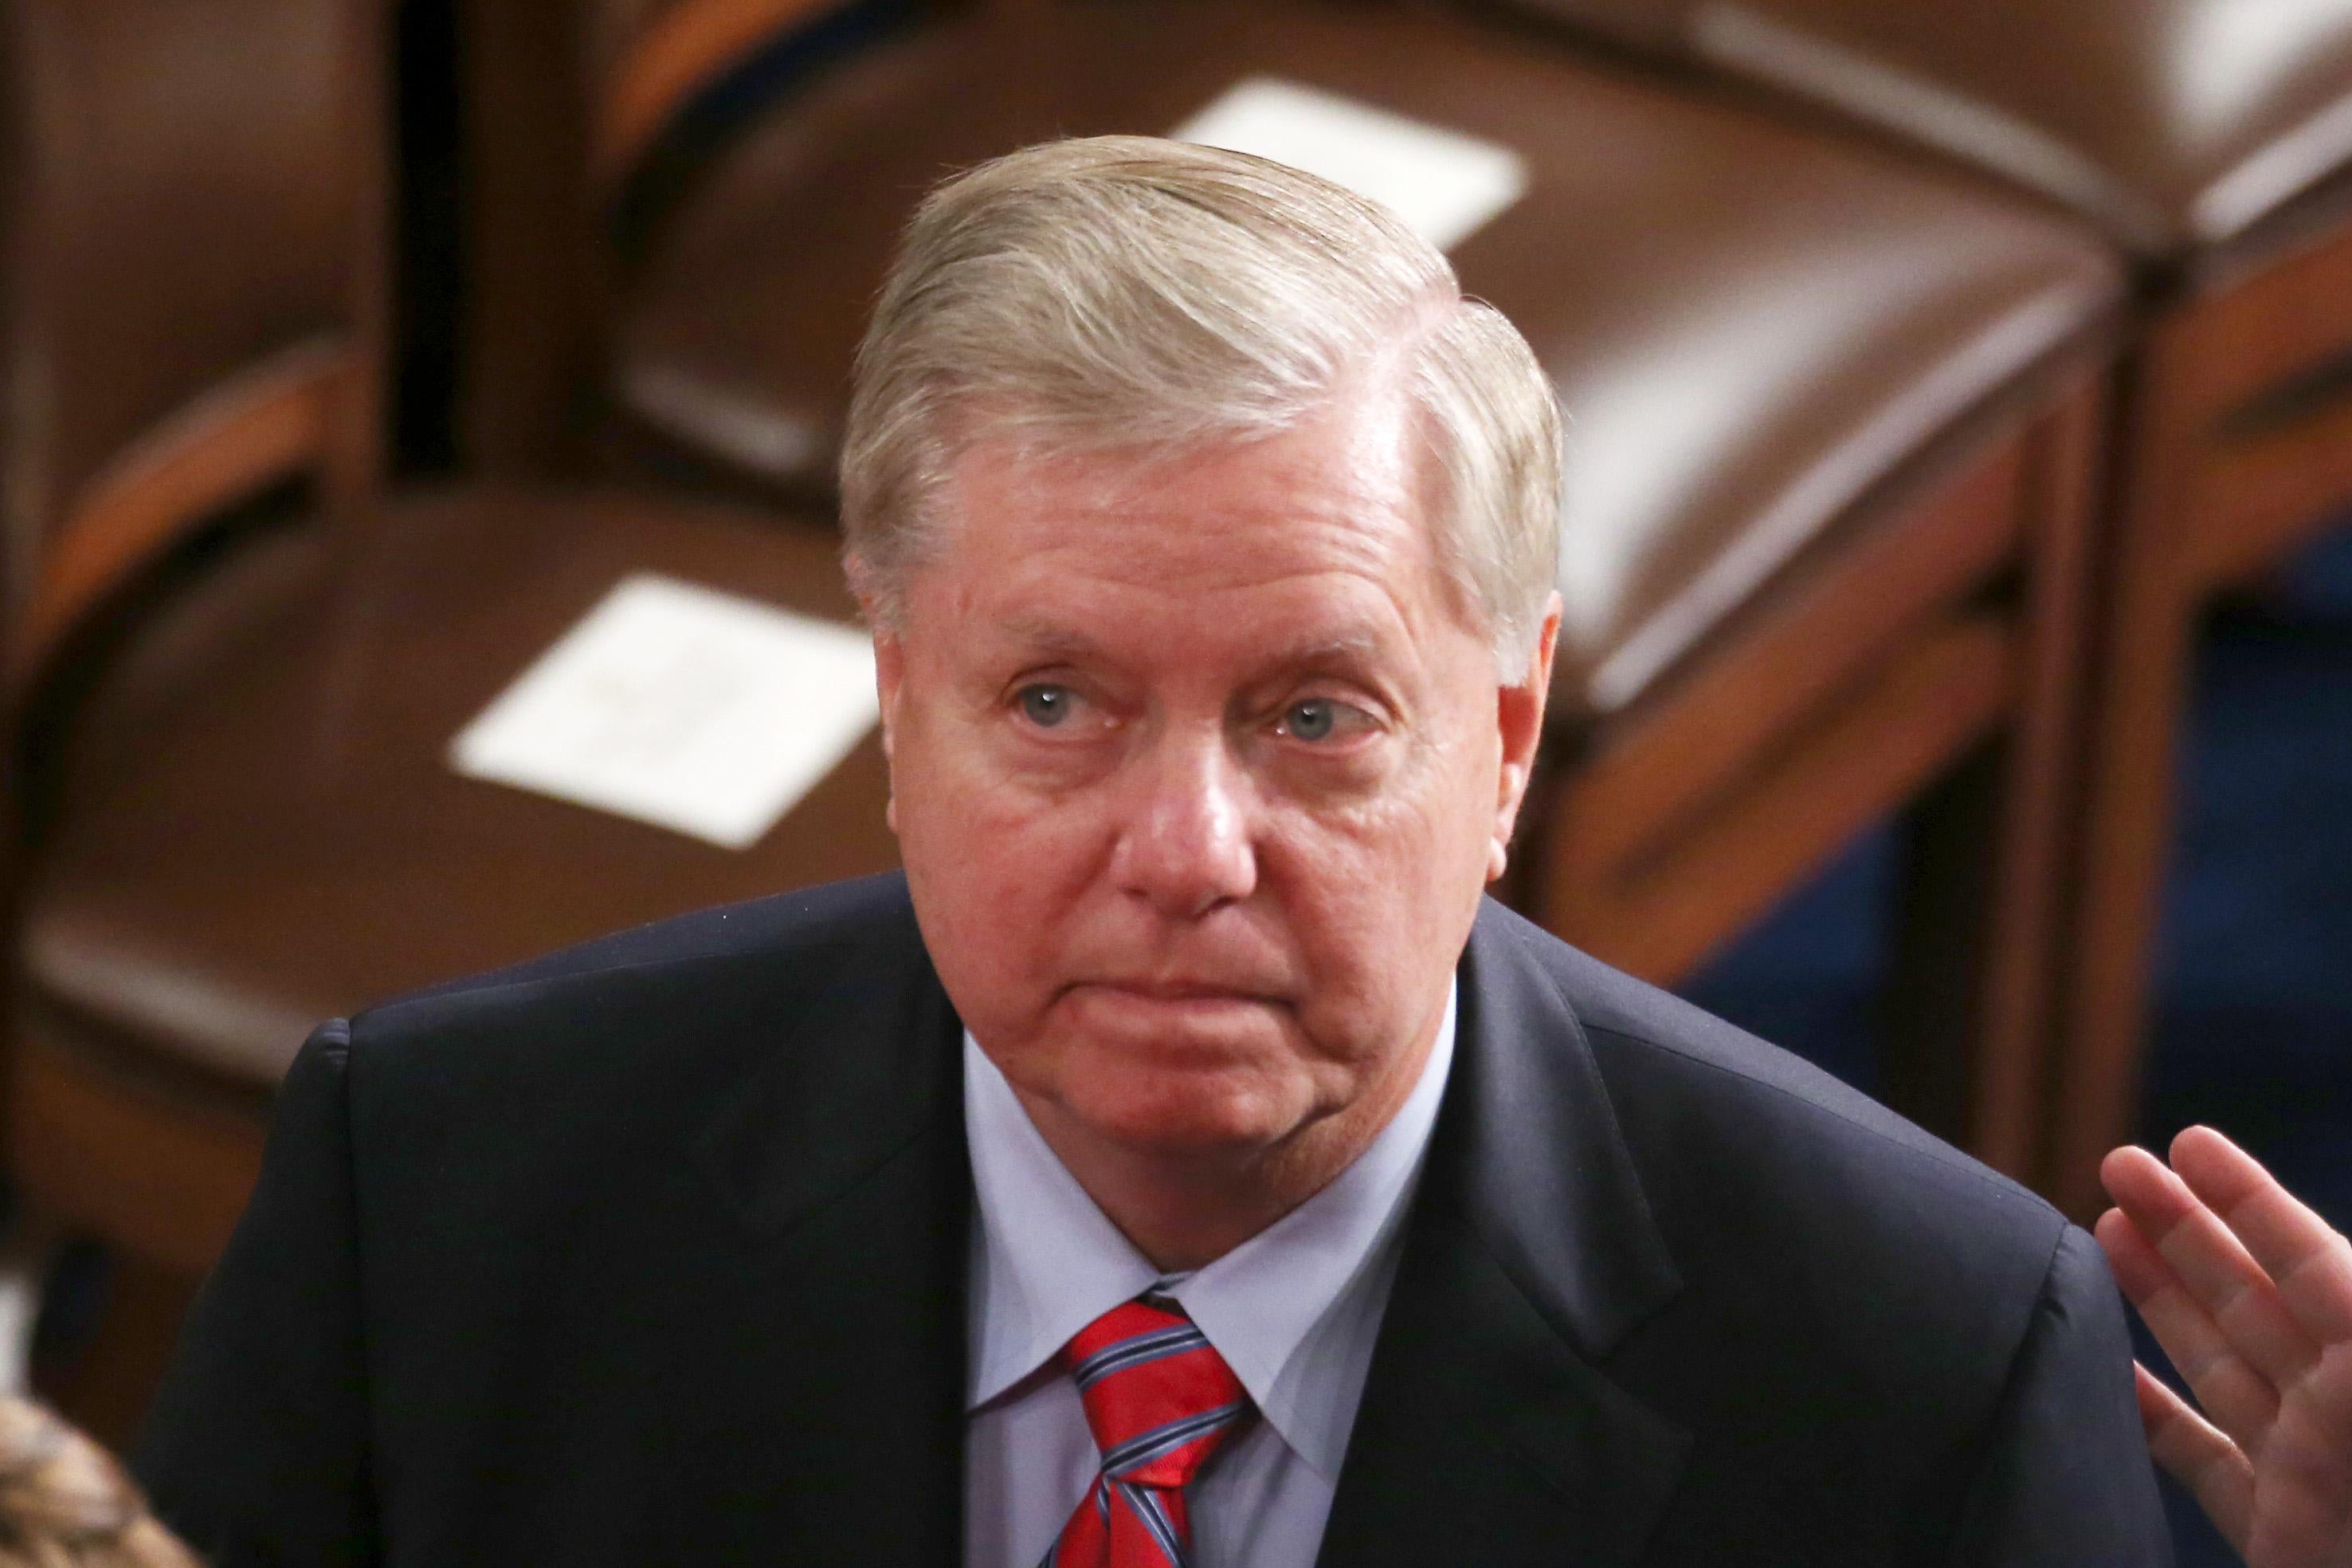 Sen. Lindsey Graham attends the State of the Union address in the chamber of the House of Representatives on February 4, 2020 in Washington, D.C.